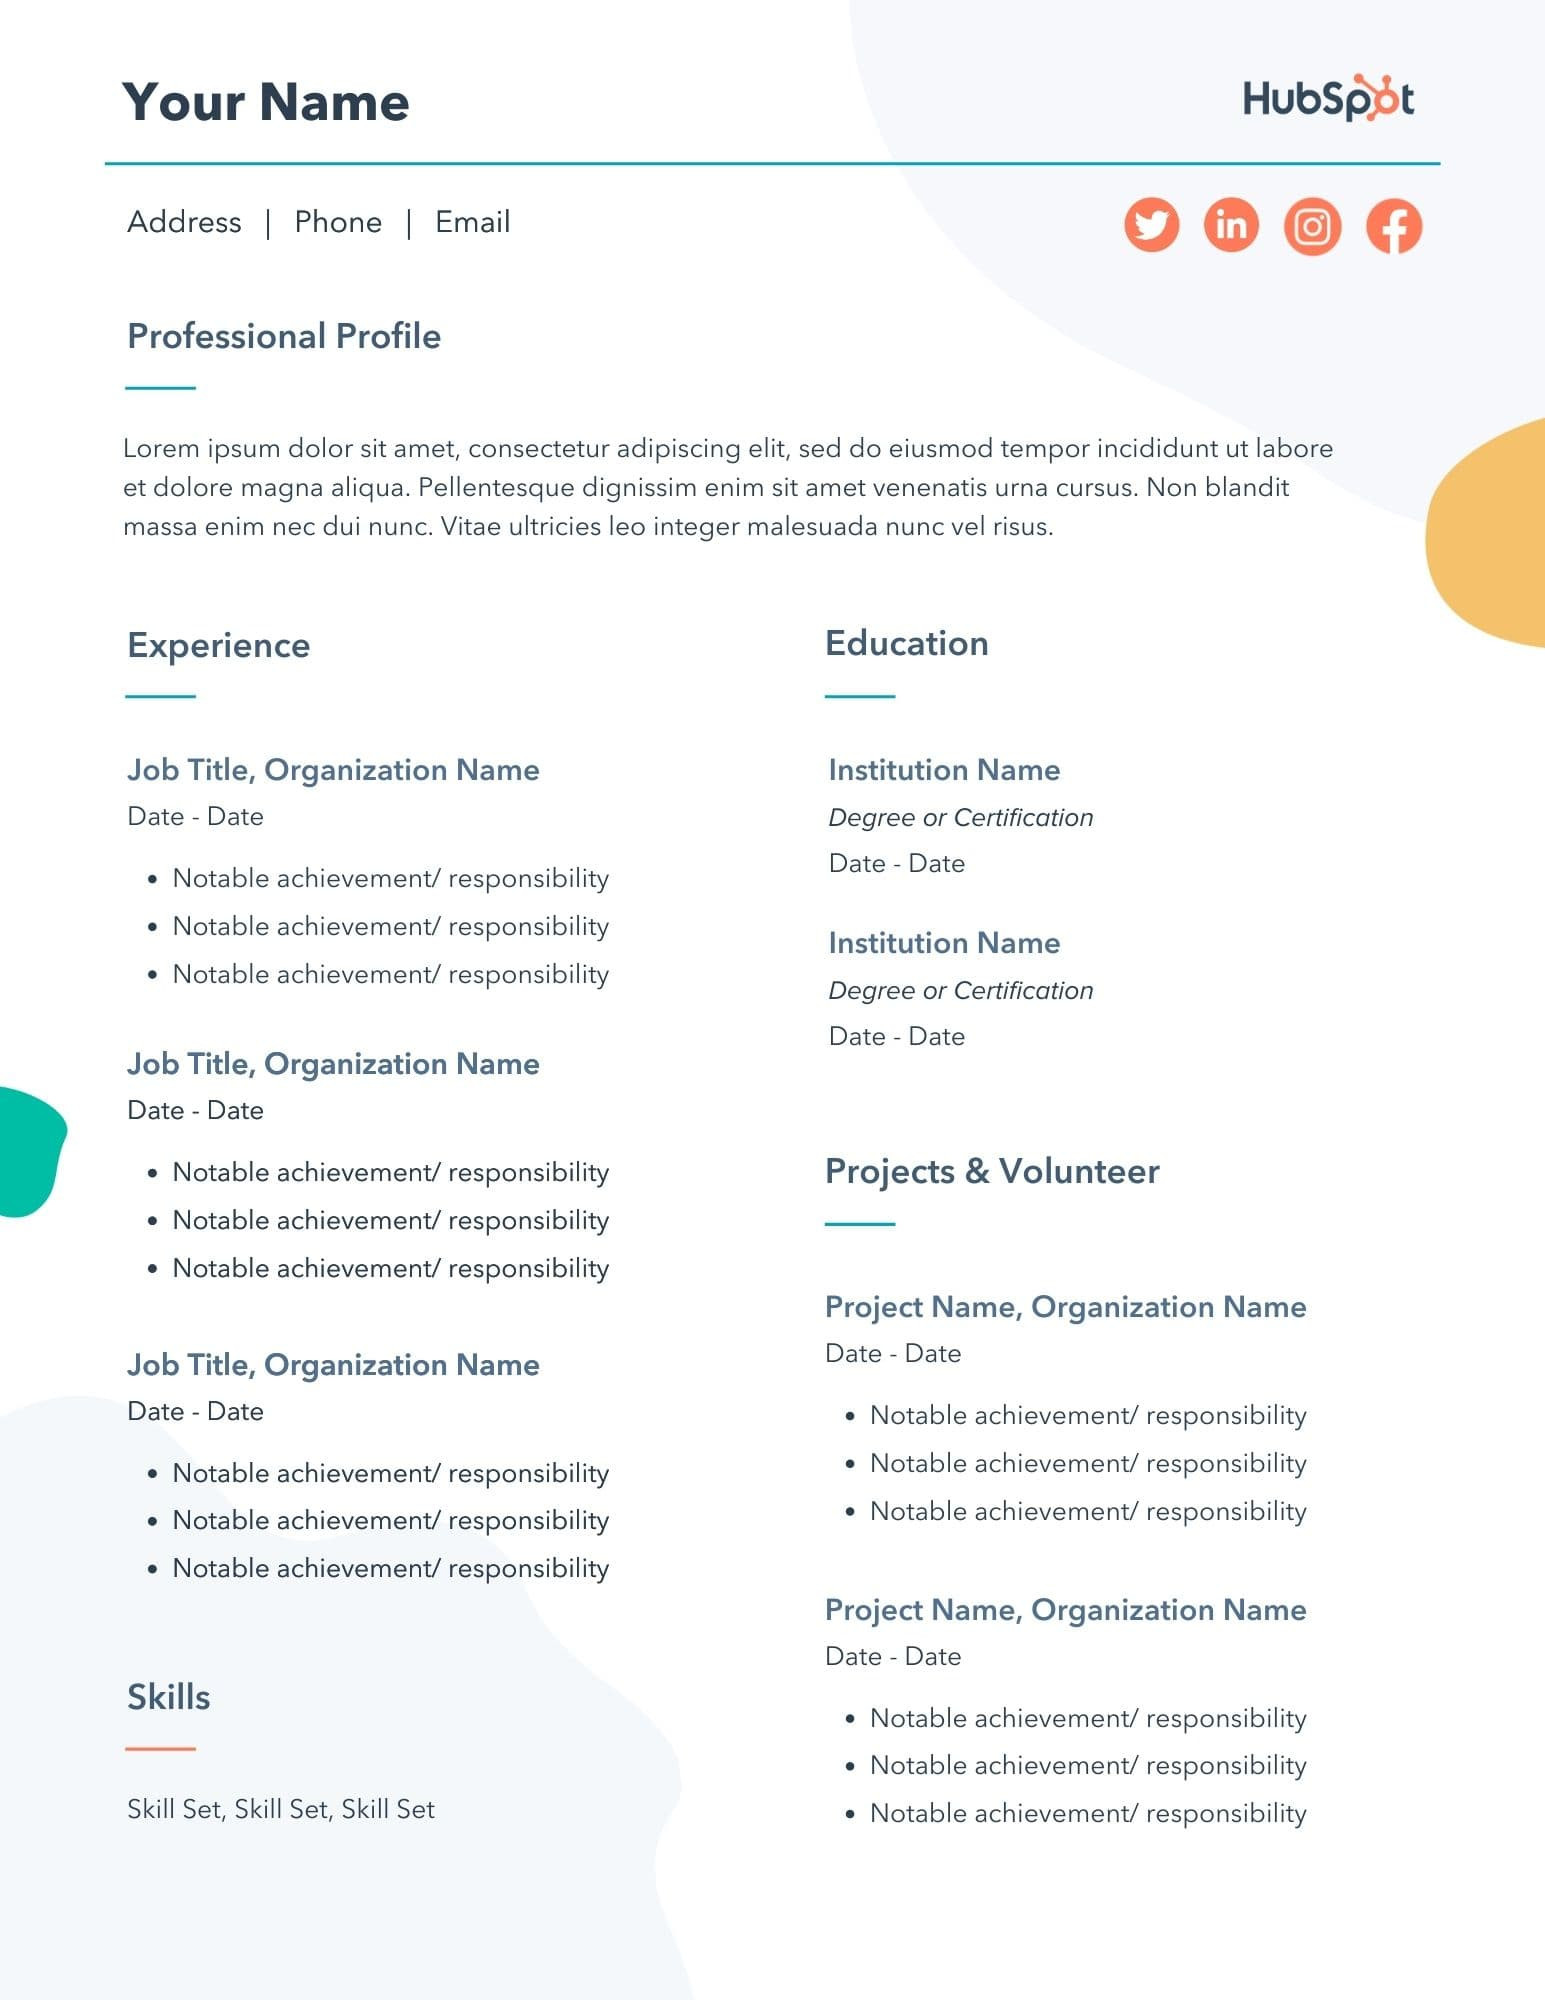 Resume Template for A Lot Of Experience 29 Free Resume Templates for Microsoft Word (& How to Make Your Own)